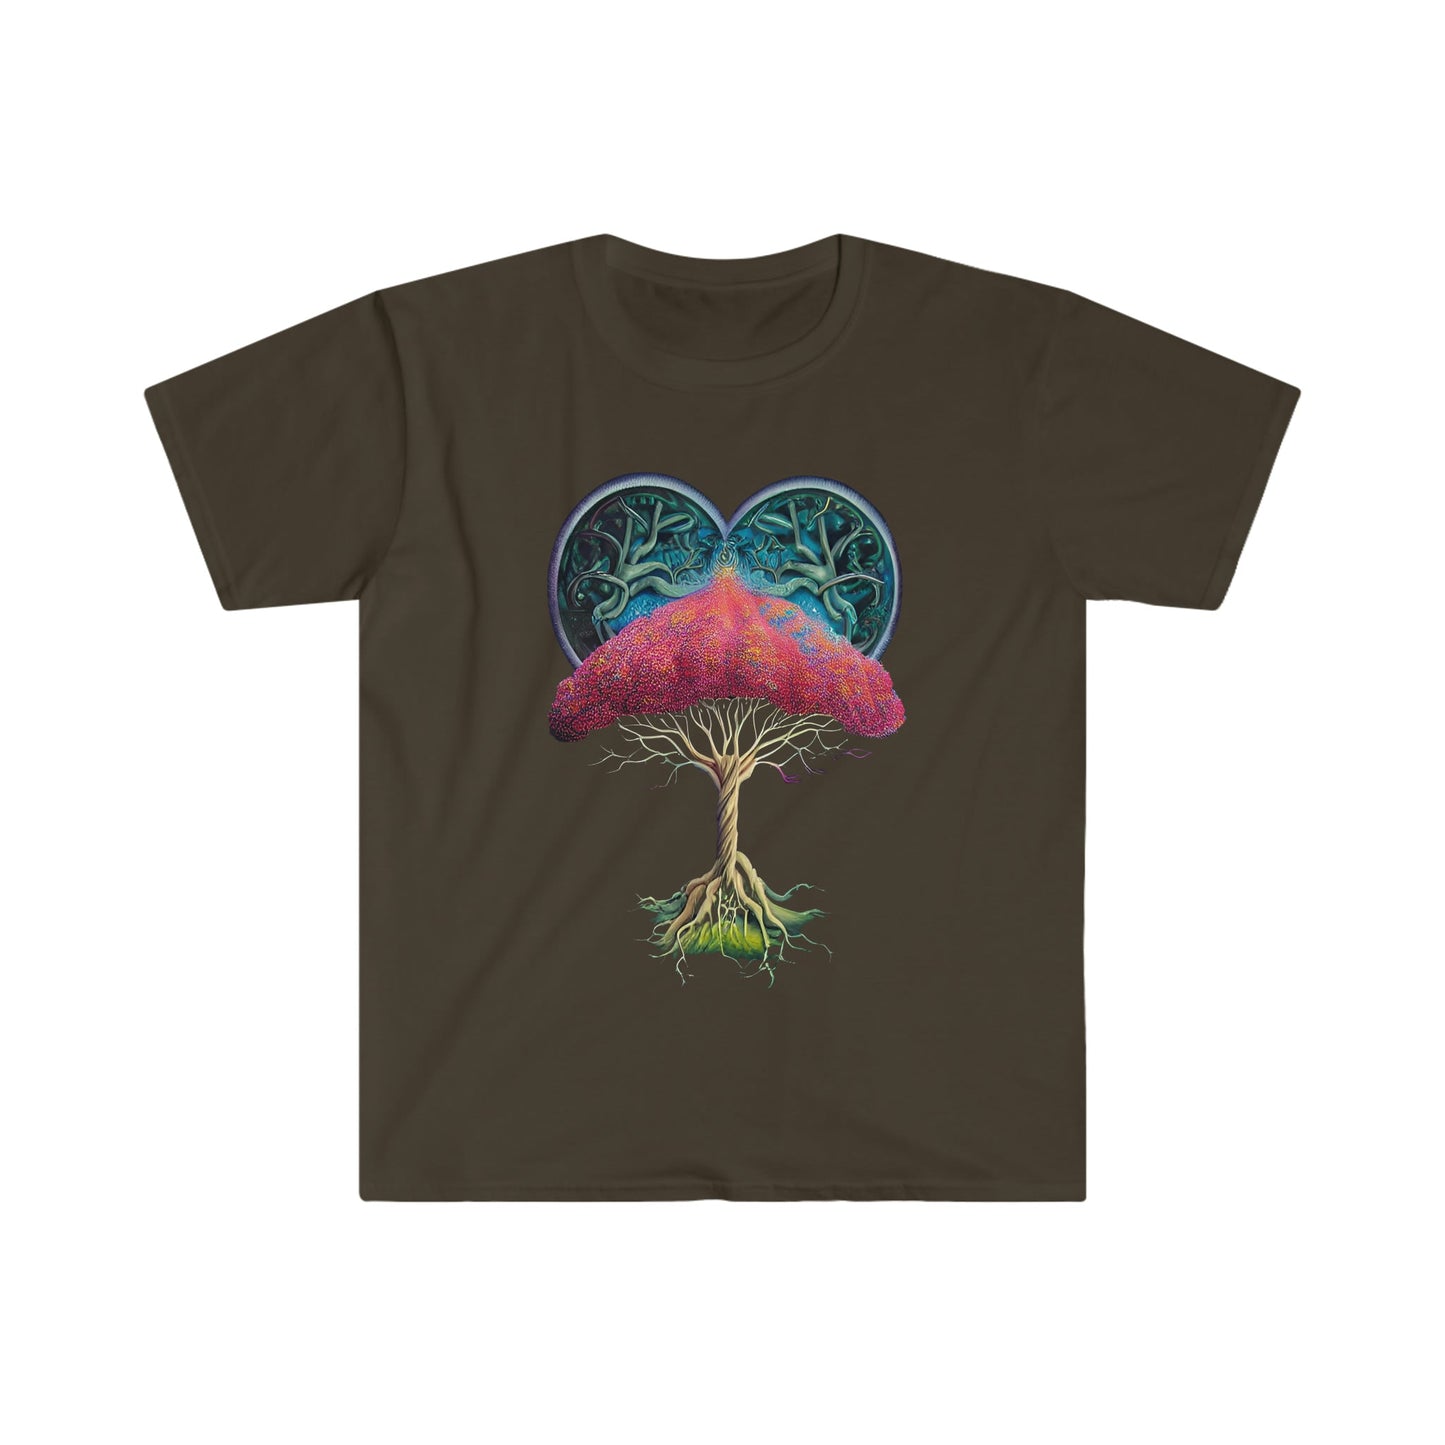 Men's Heart of the Forest Tee